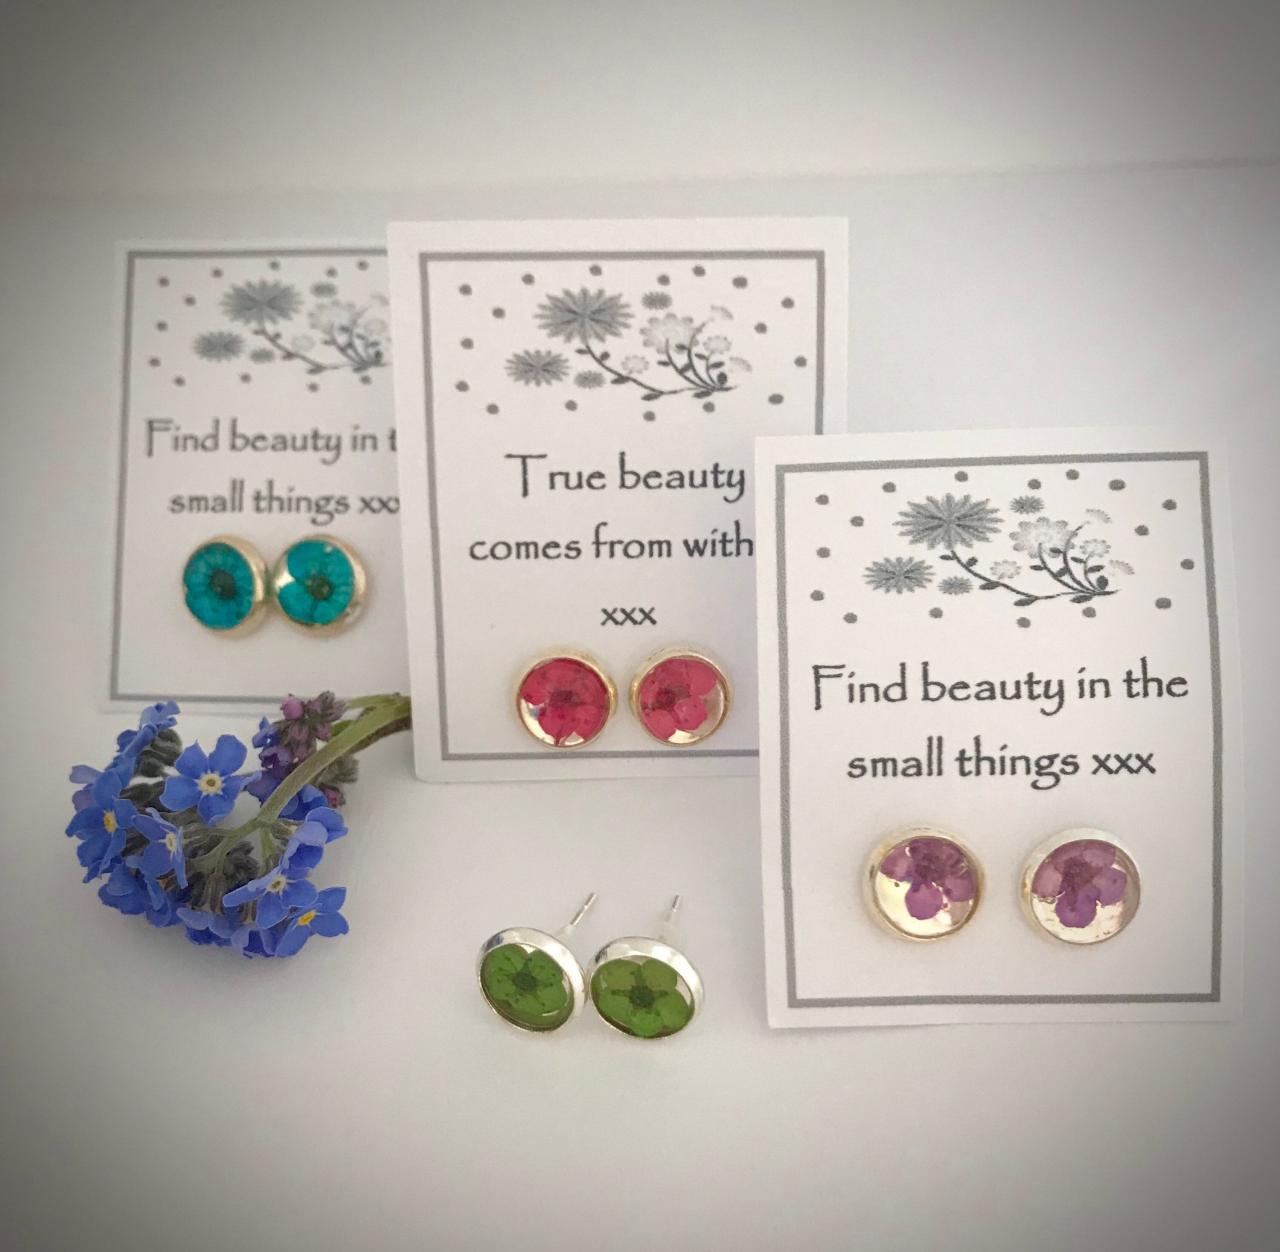 Memories Of Flowers - Dried Flower Earrings With A Beautiful Message